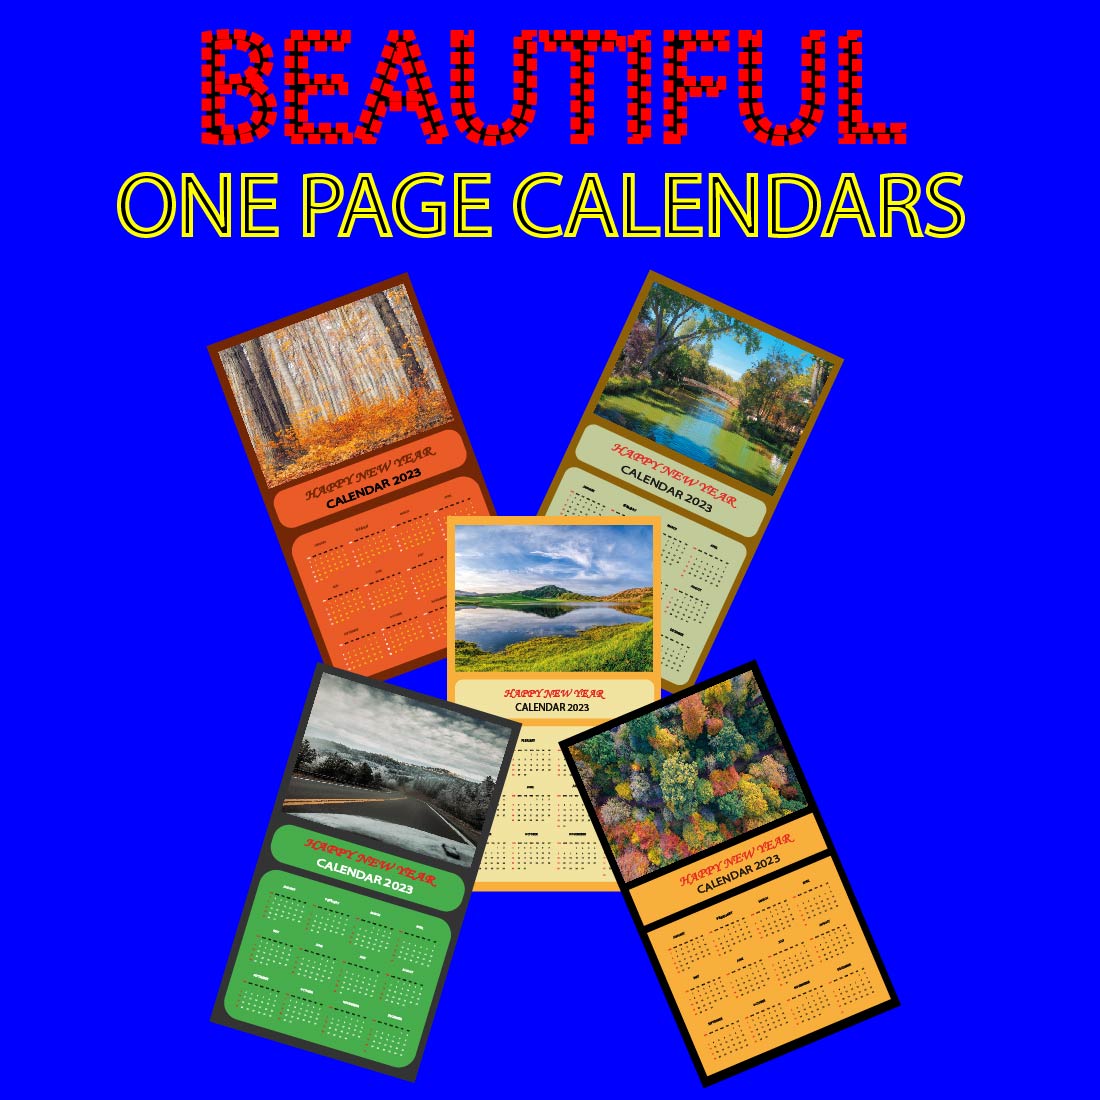 Beautiful One Page Calendars Design cover image.